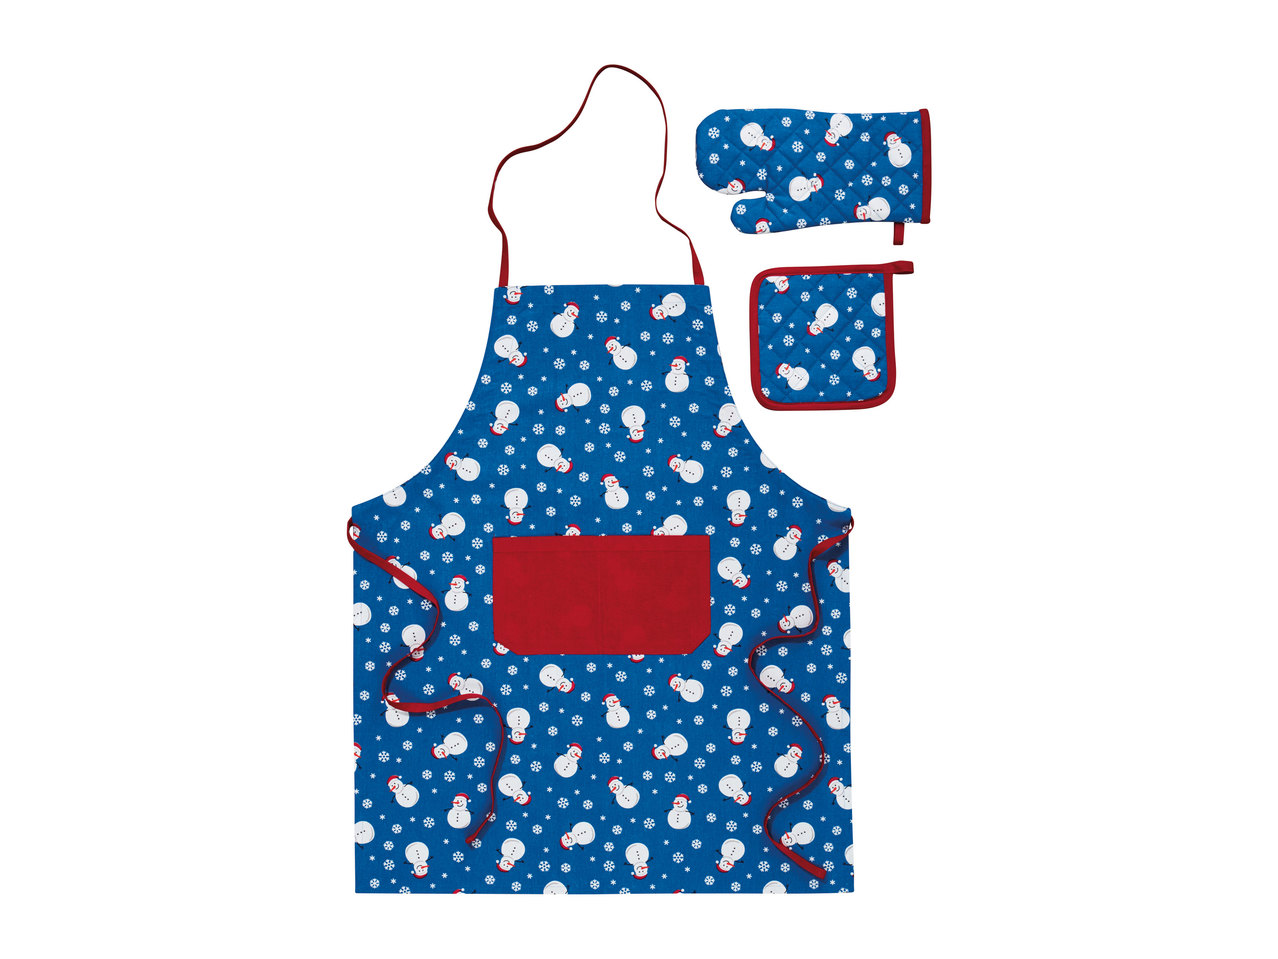 Meradiso Apron and Oven Gloves Set1